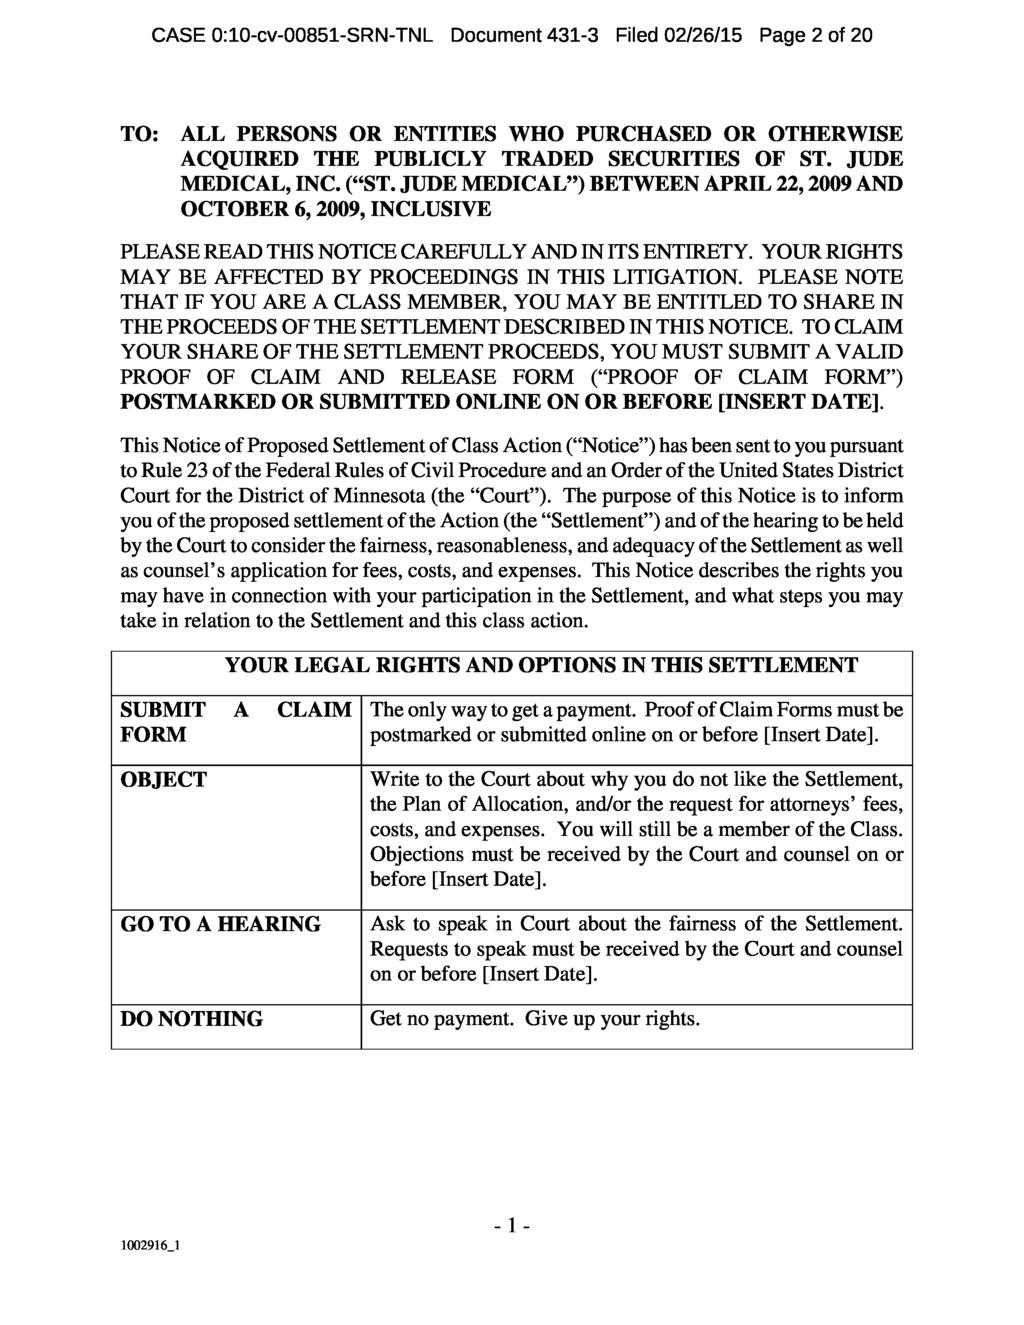 CASE 0:10-cv-00851-SRN-TNL Document 431-3 Filed 02/26/15 Page 2 of 20 TO: ALL PERSONS OR ENTITIES WHO PURCHASED OR OTHERWISE ACQUIRED THE PUBLICLY TRADED SECURITIES OF ST. JUDE MEDICAL, INC. ( ST.